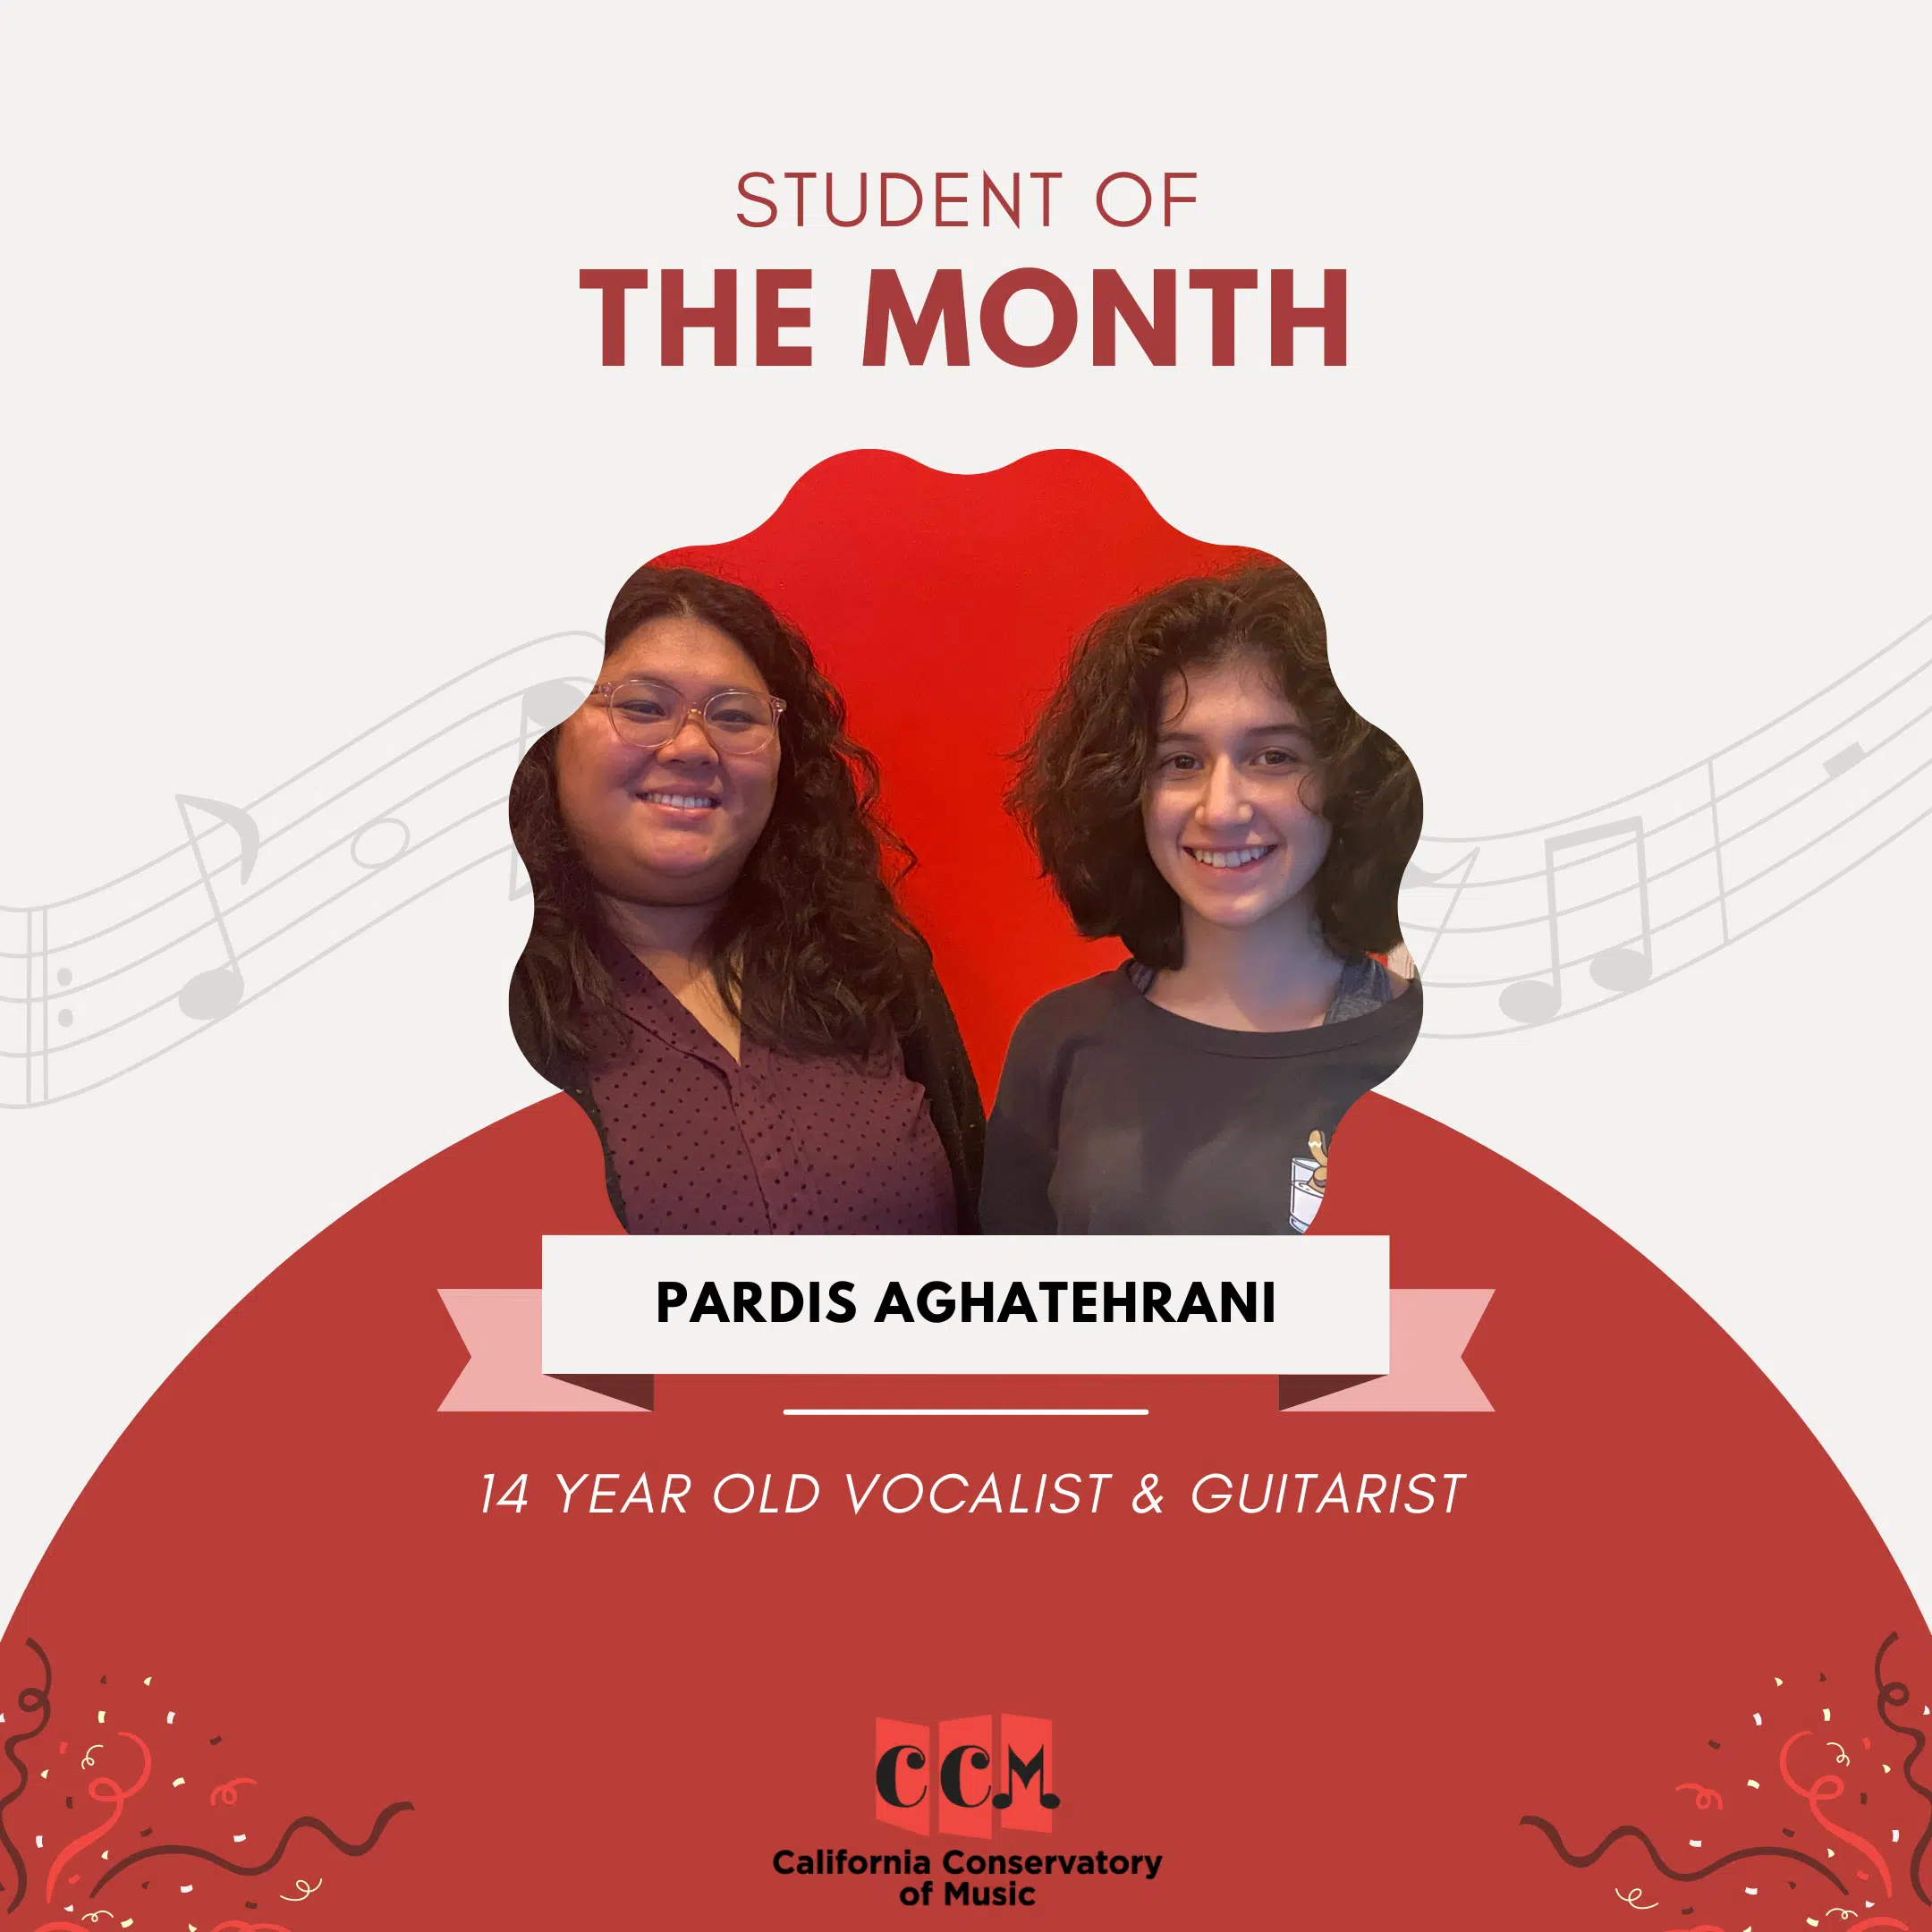 Pardis Aghatehrani, the January Student of the Month